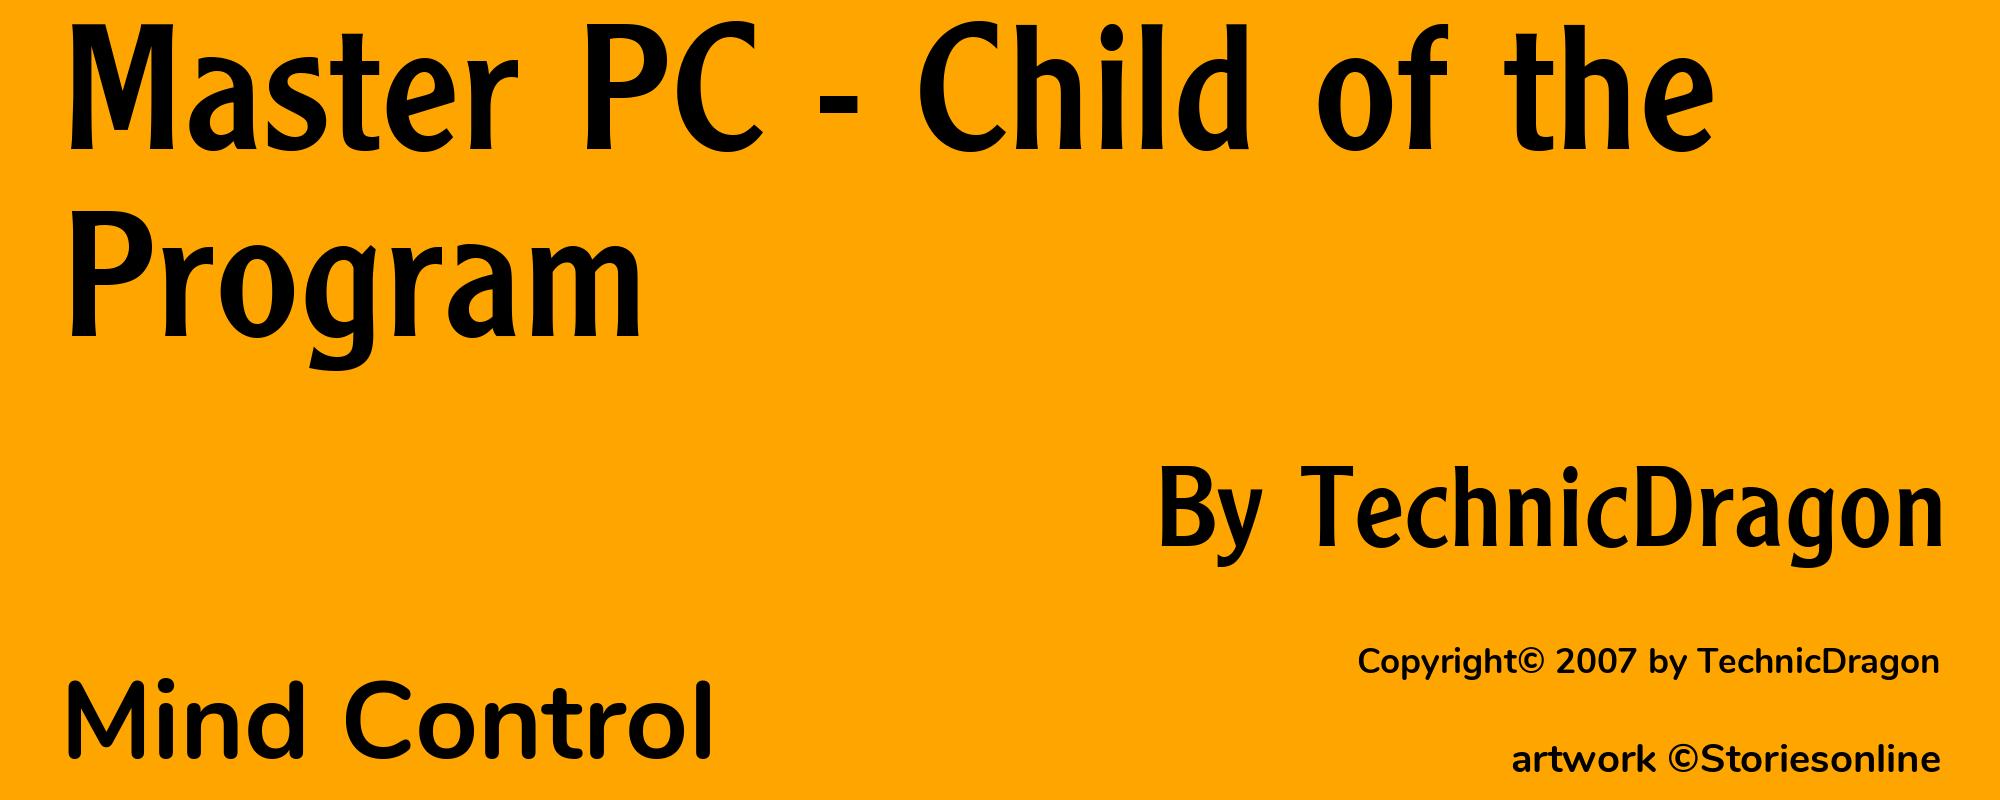 Master PC - Child of the Program - Cover